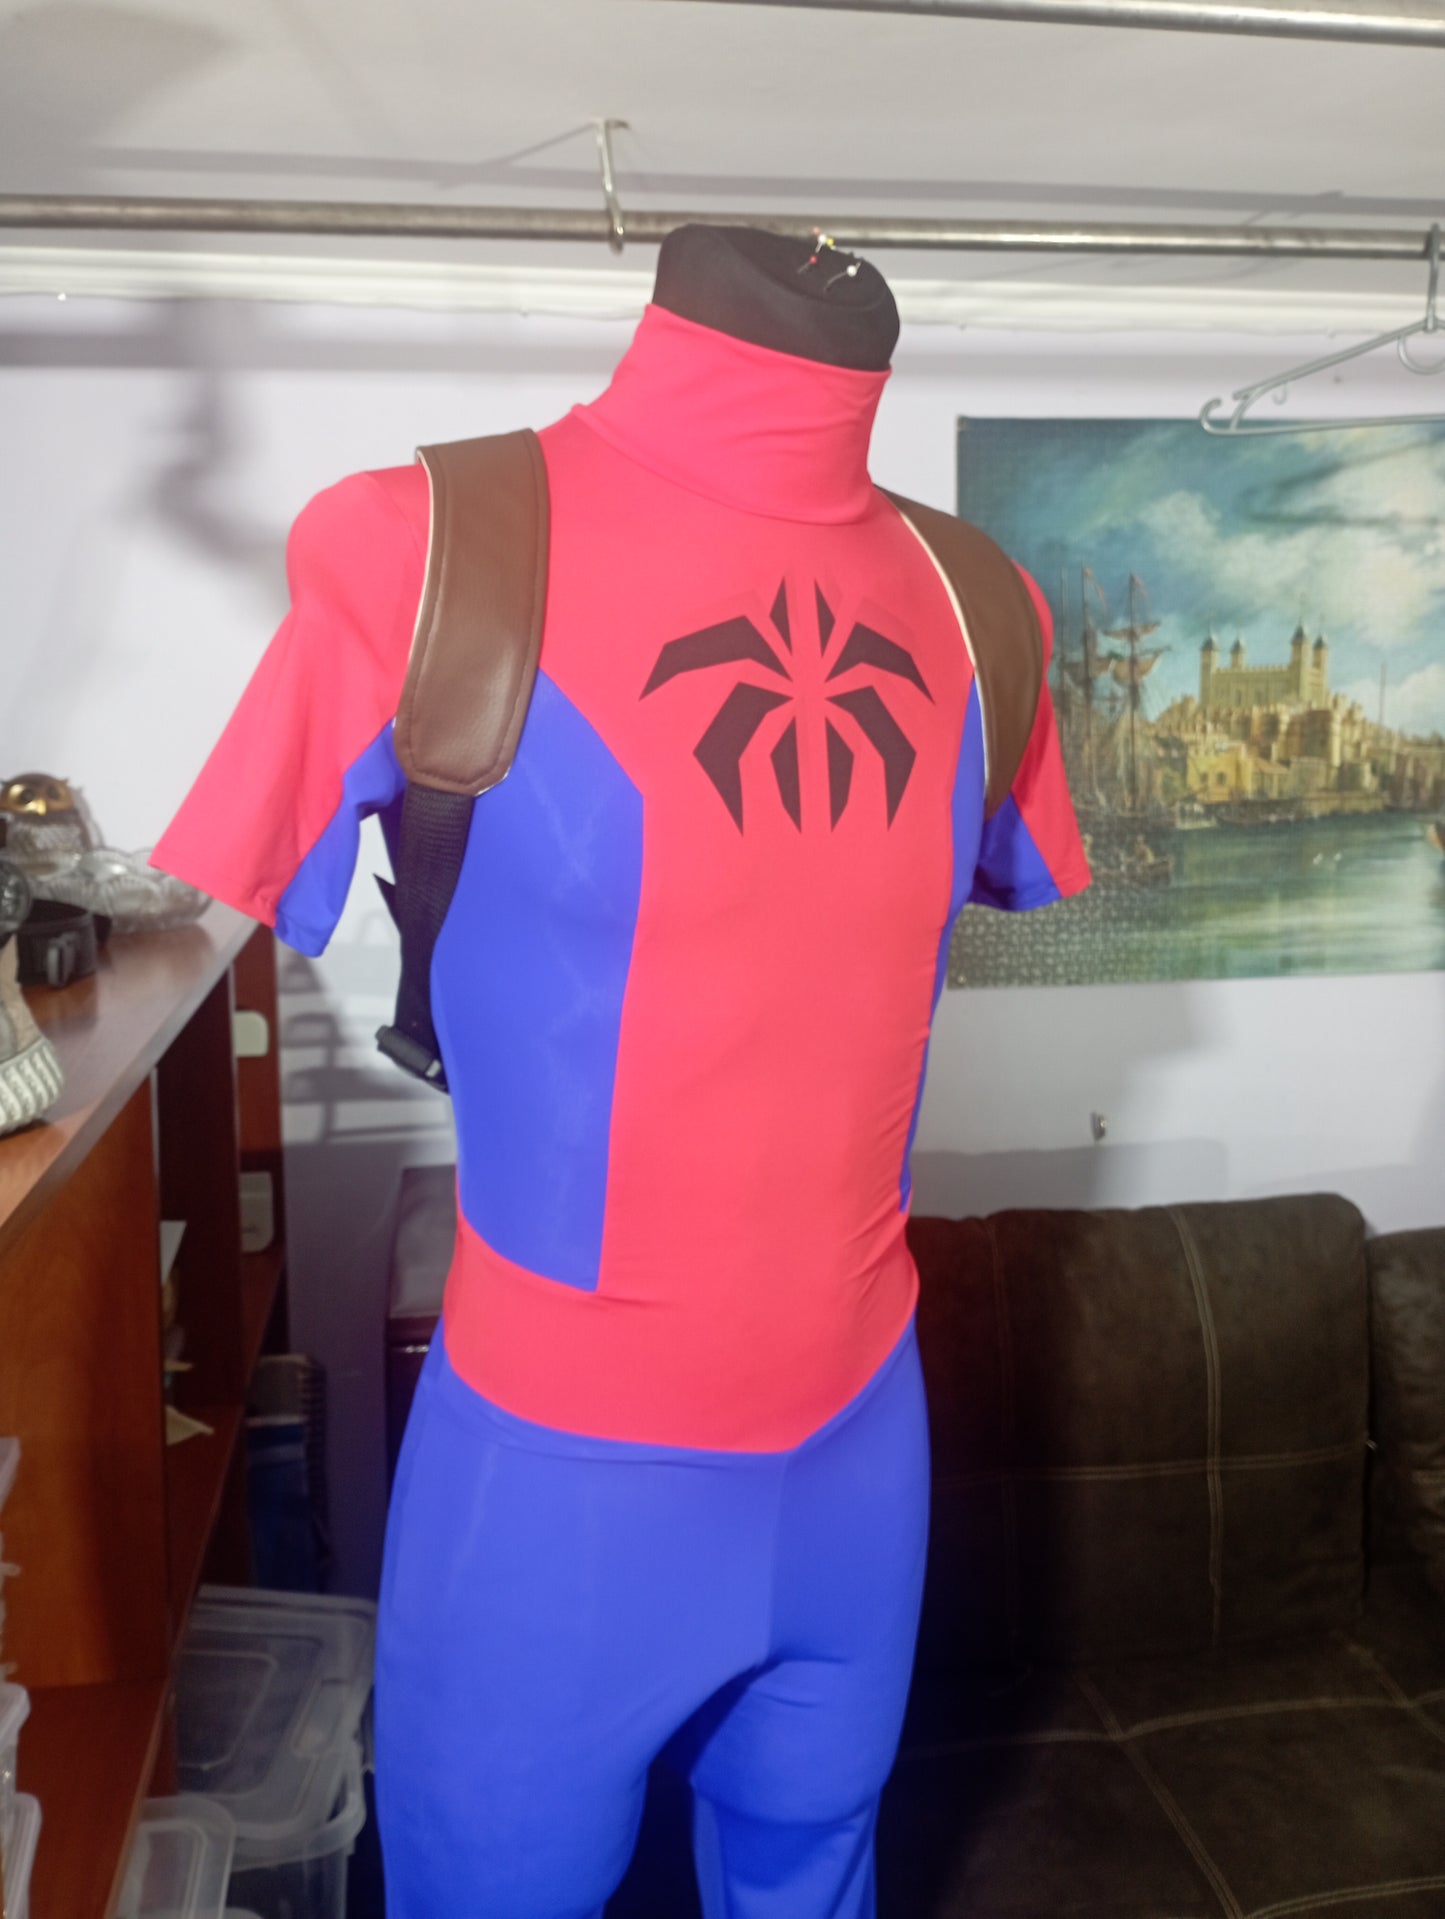 Spider outfit / spider man cosplay game cosplay